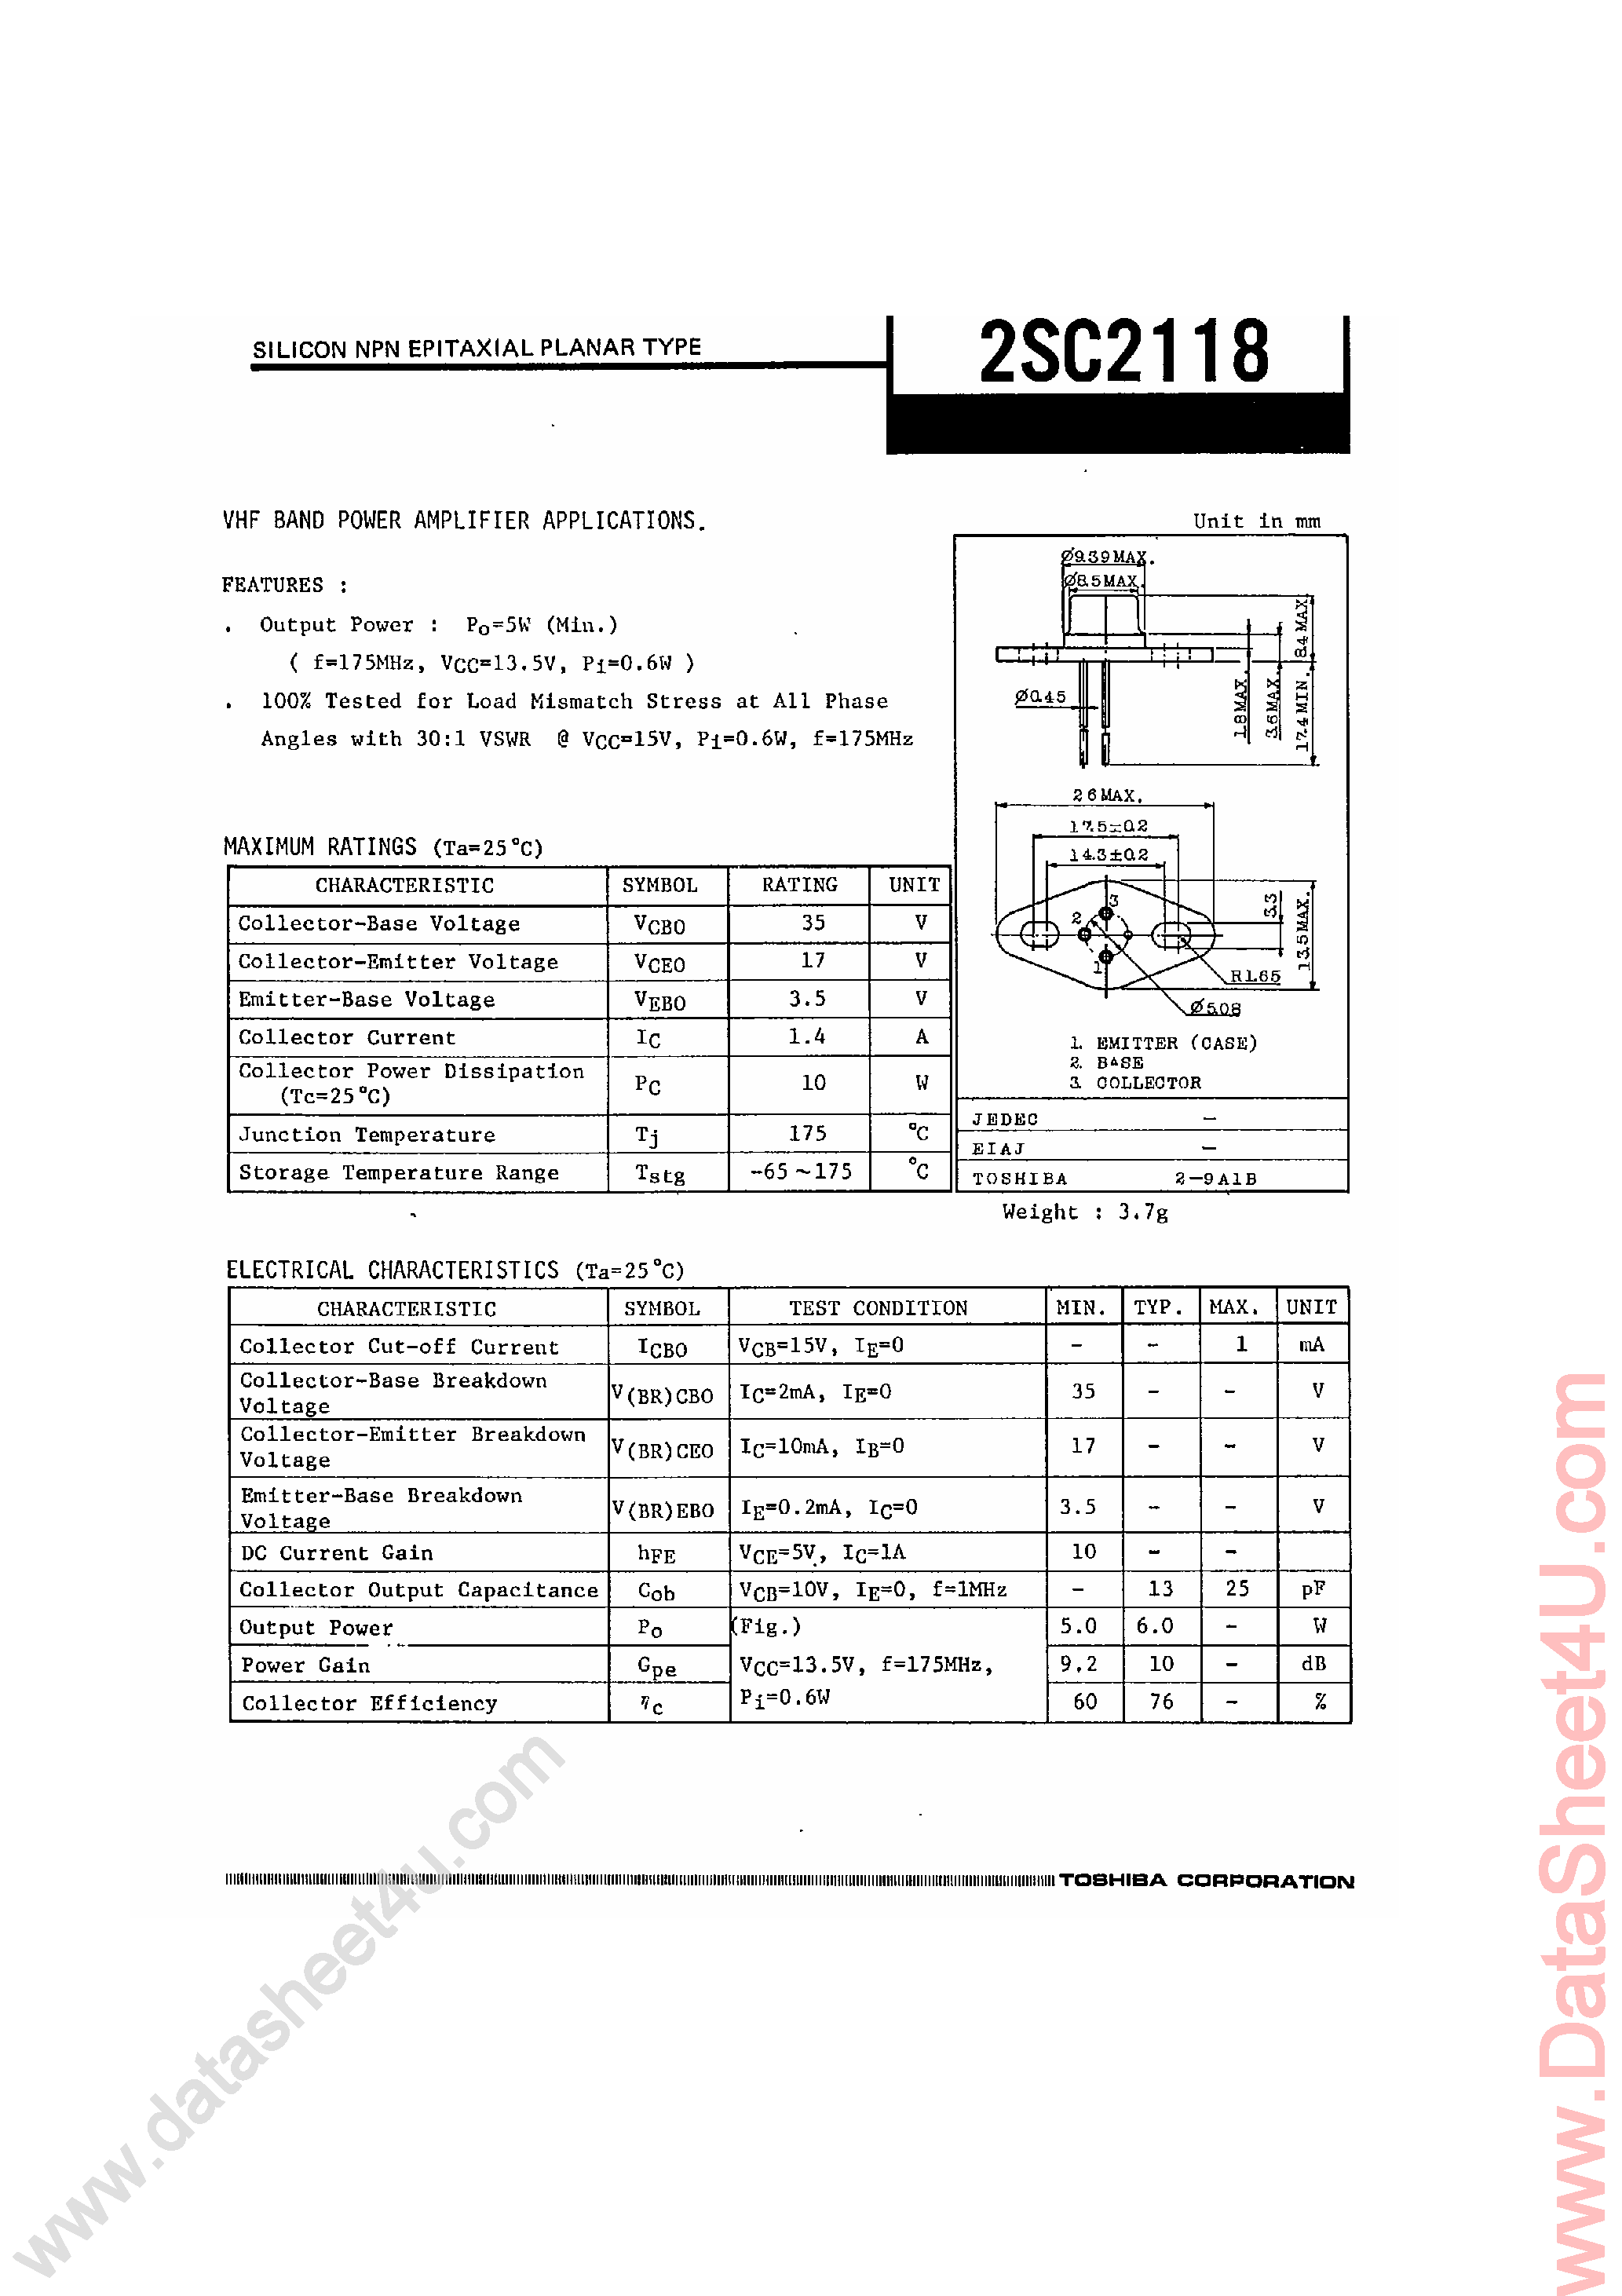 Даташит 2SC2118 - Silicon NPN Epitaxial Planar Type страница 1